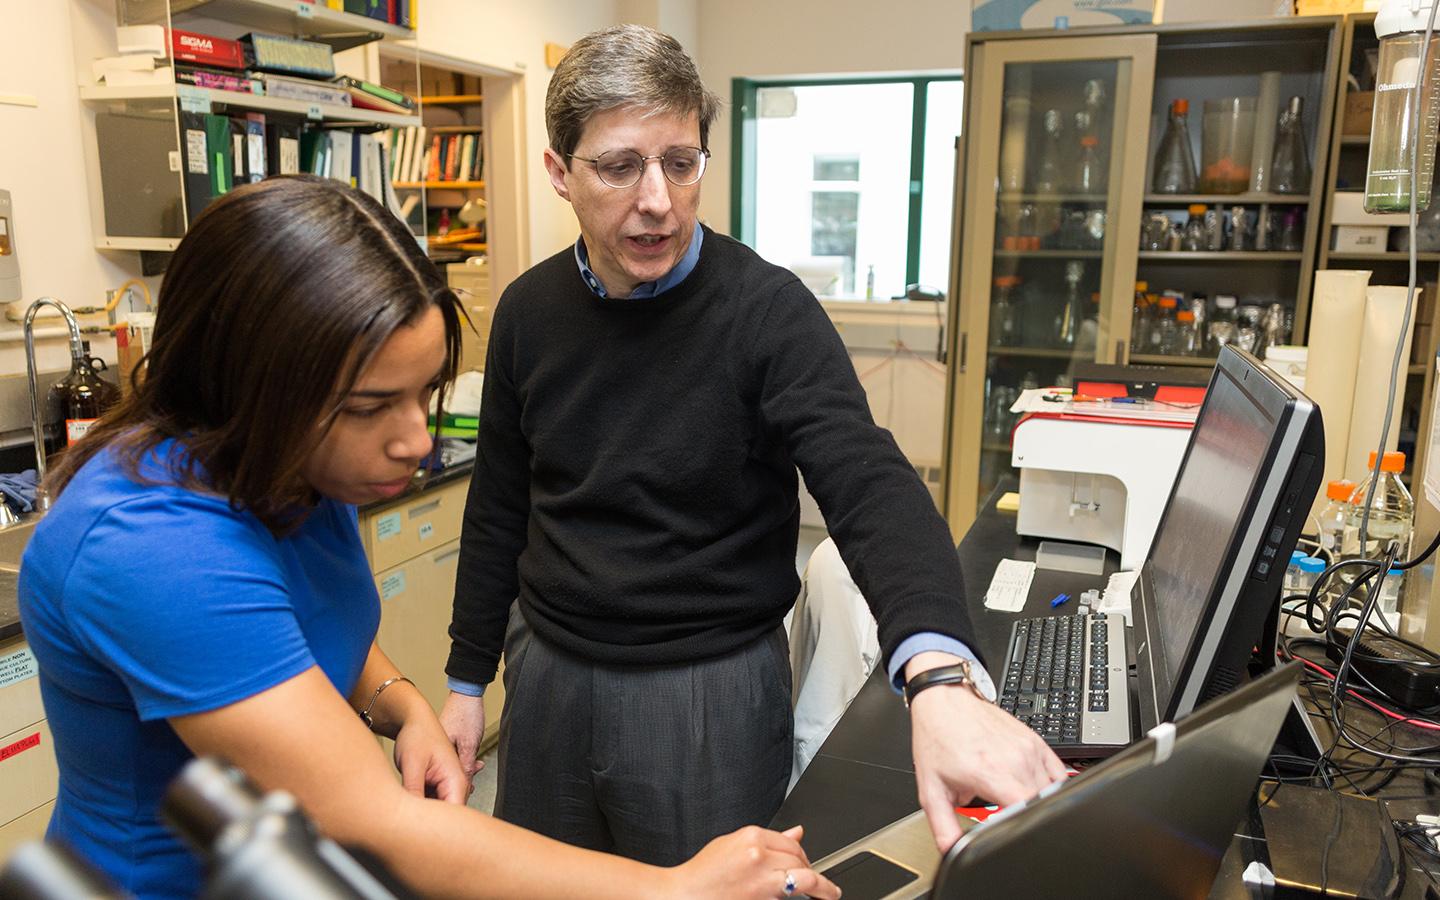 Immunology Program member and Professor of Microbiology and Immunology Charles Sentman in a teaching moment with Tiffany Coupet, Guarini ’20, in a photo taken pre-COVID-19 protocols.